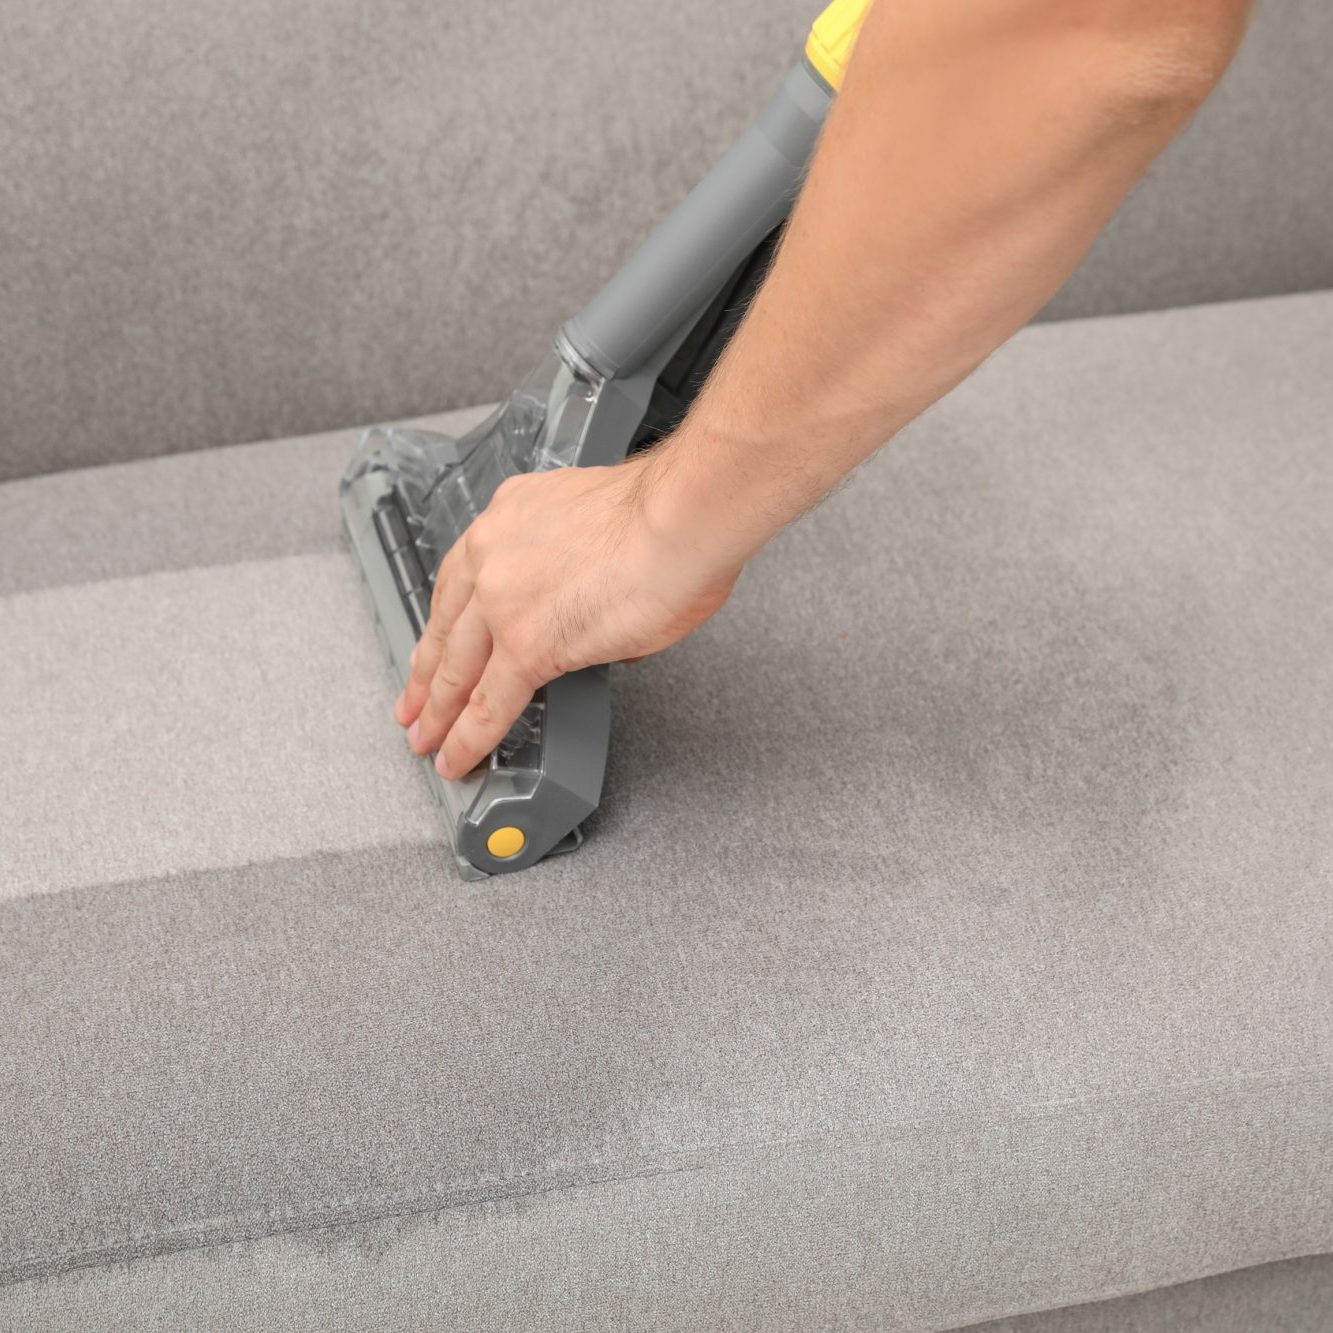 removing dirt from sofa with upholstery cleaner